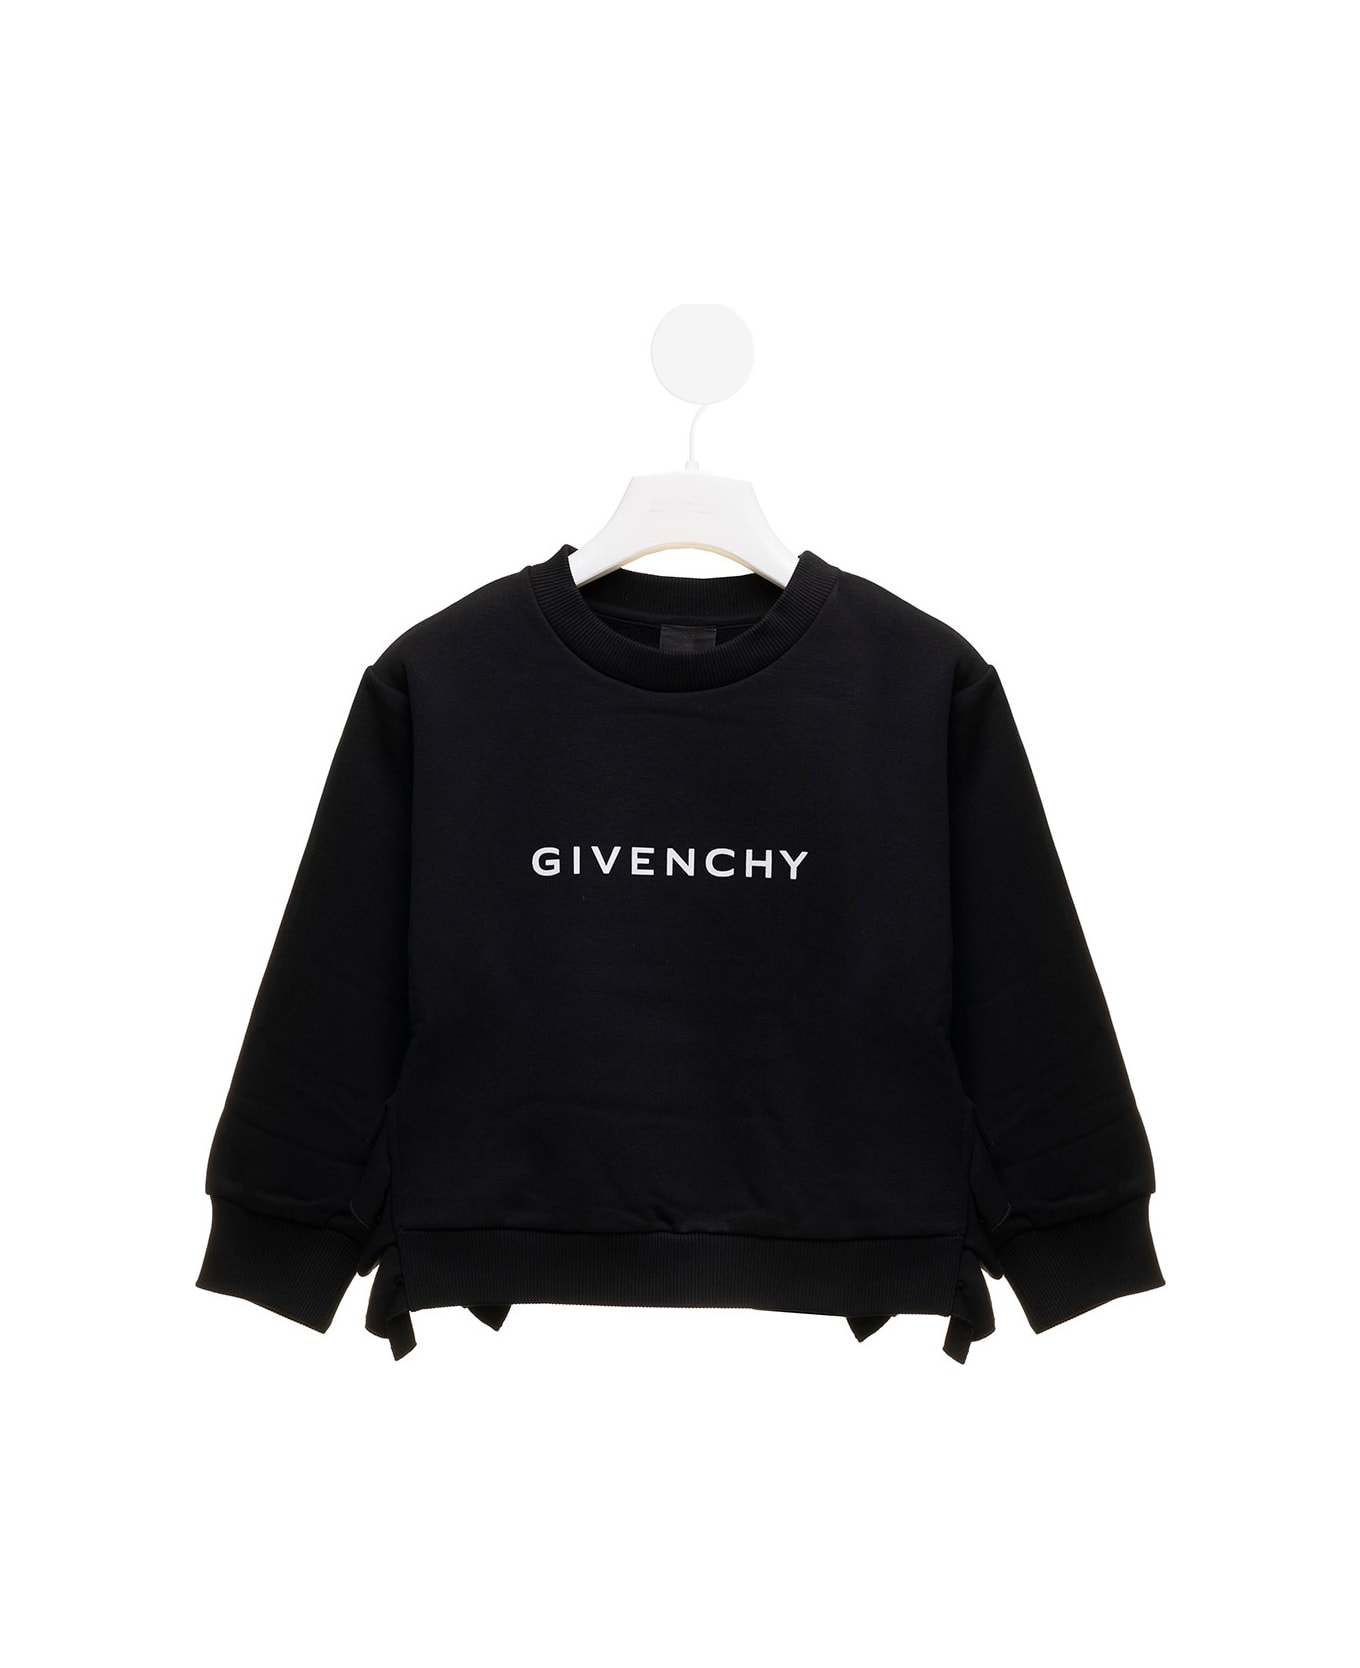 Givenchy Black Jersey Sweatshirt With Logo And Ruffles Detail Givenchy Kids Girl - Black